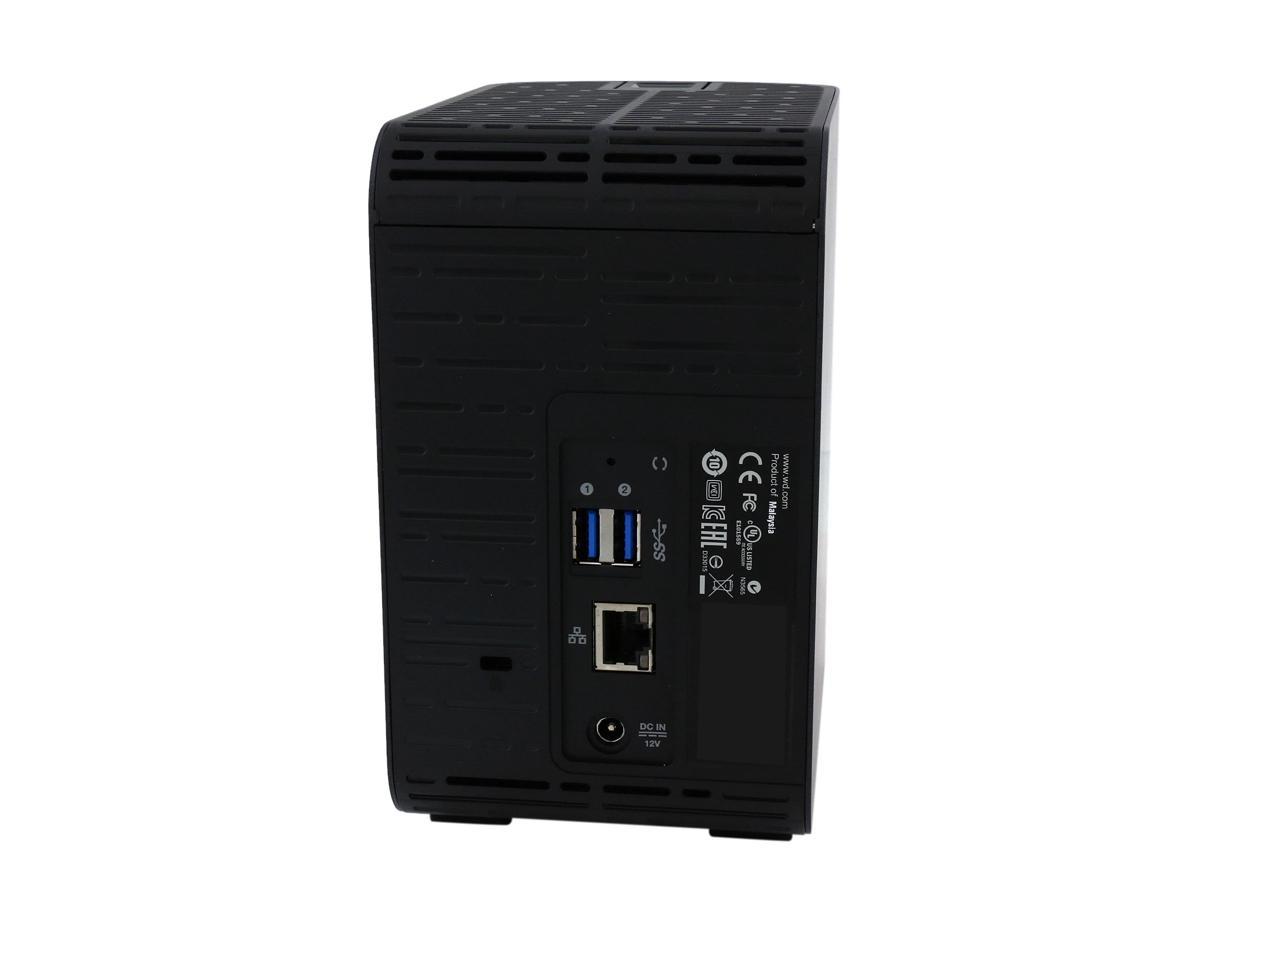 Diskless WD WDBVKW0000NCH-EESN My Cloud EX2 Network Attached Storage